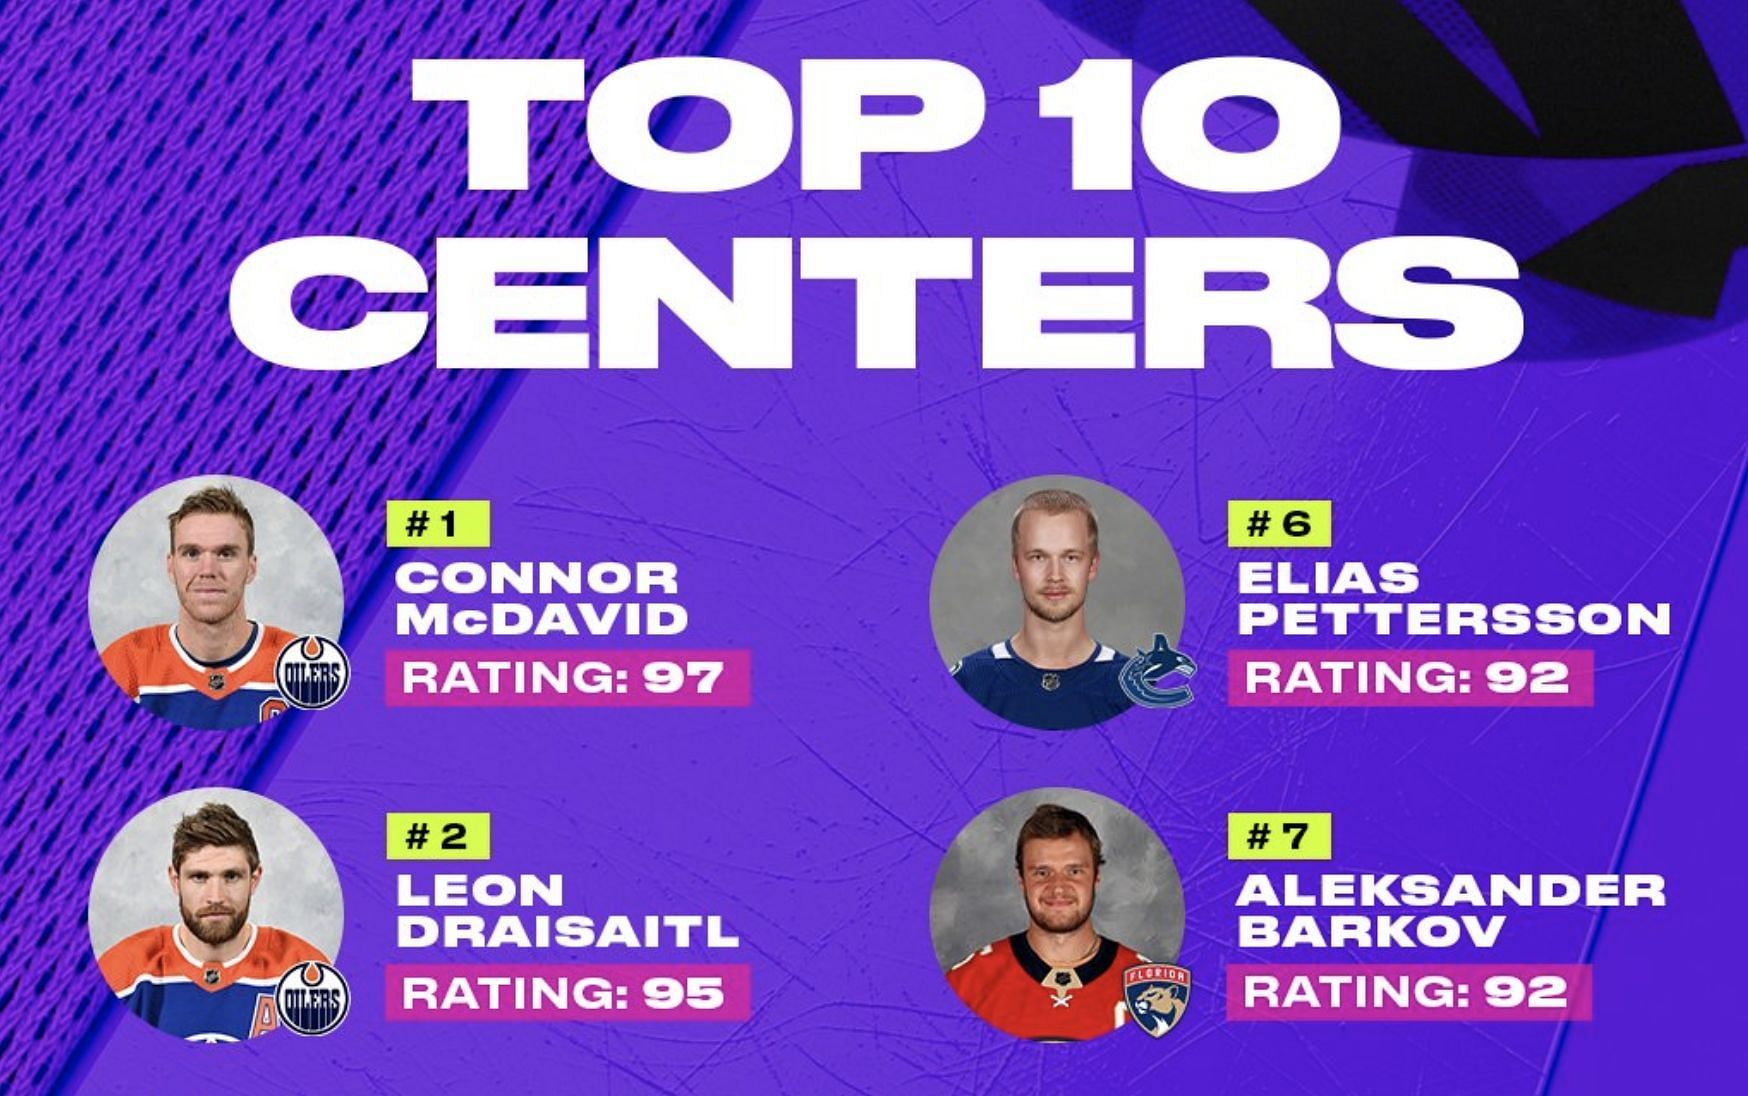 NHL fans deliver their hot takes over NHL 24 Top 10 Center rankings